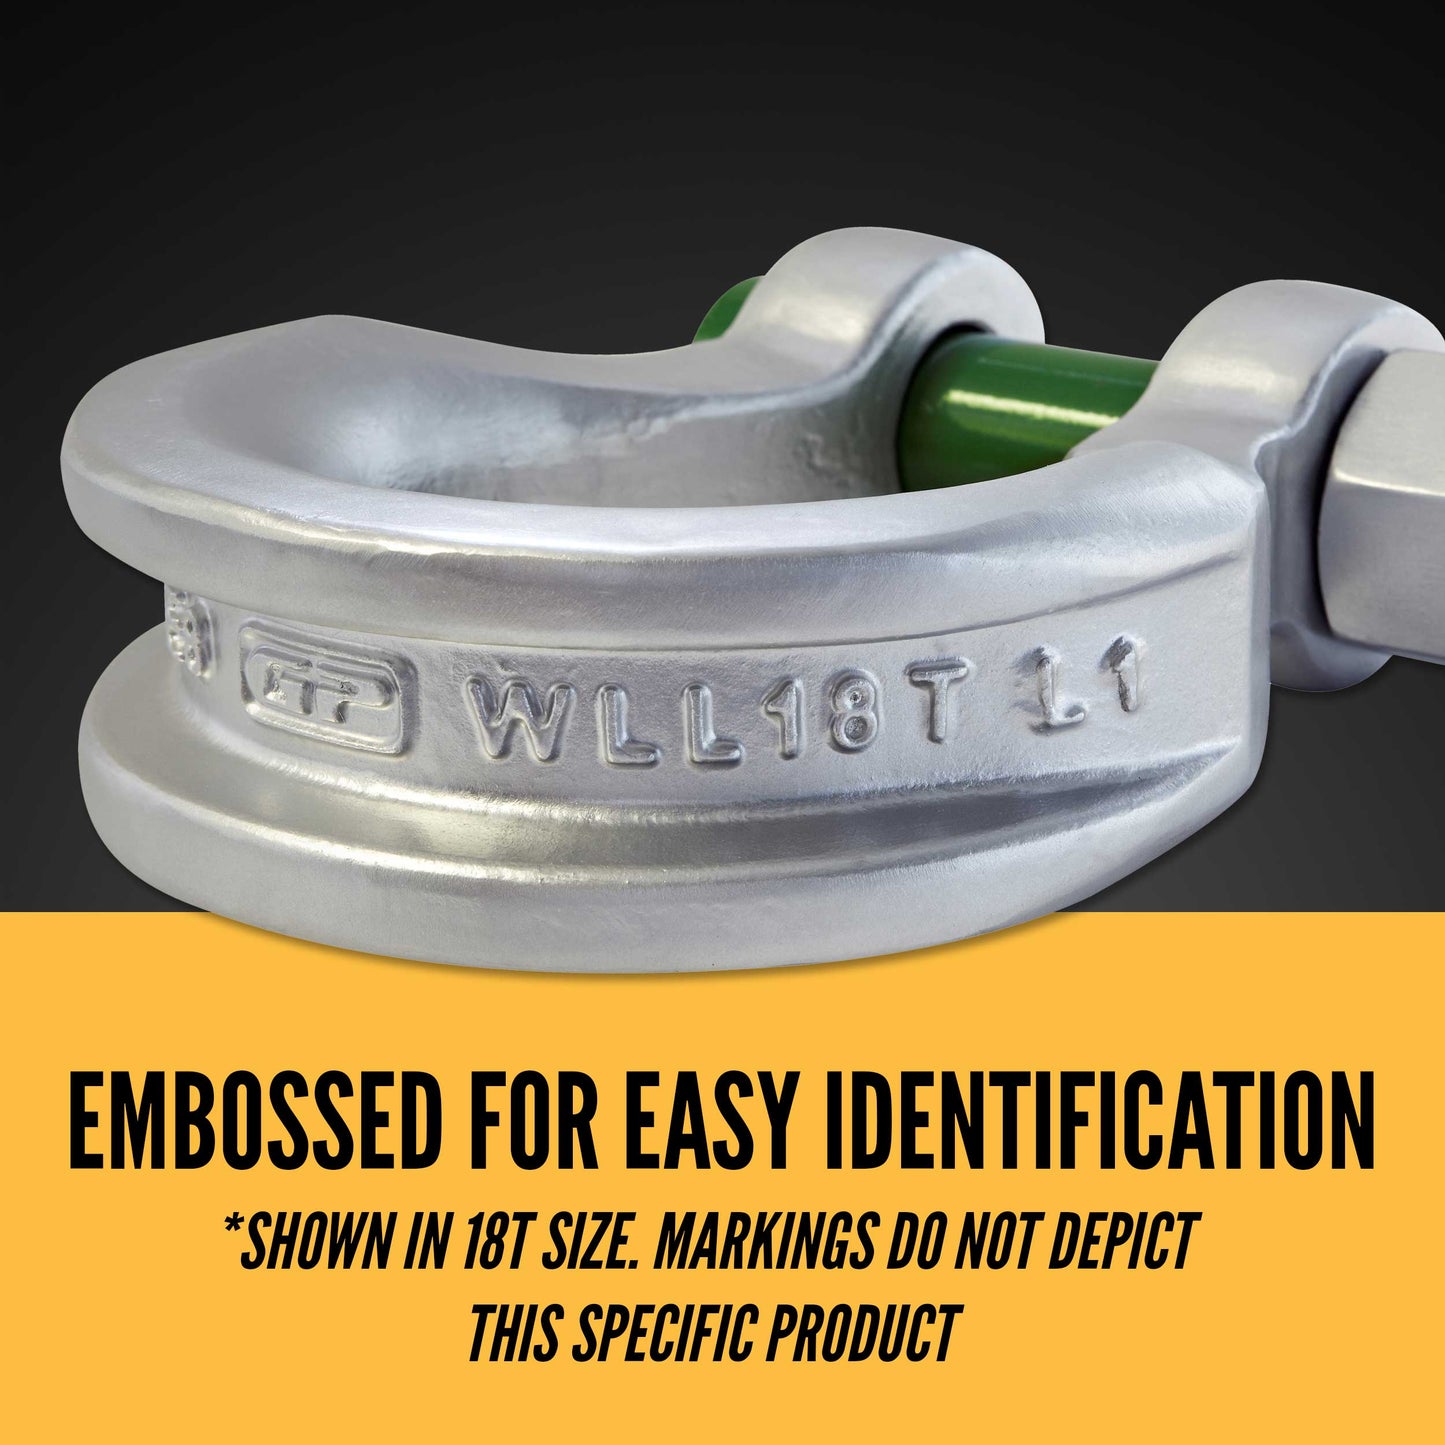 Van Beest Green Pin Bolt Type Wide Body Sling Shackle | P-6033 - 250 Ton embossed for easy identification